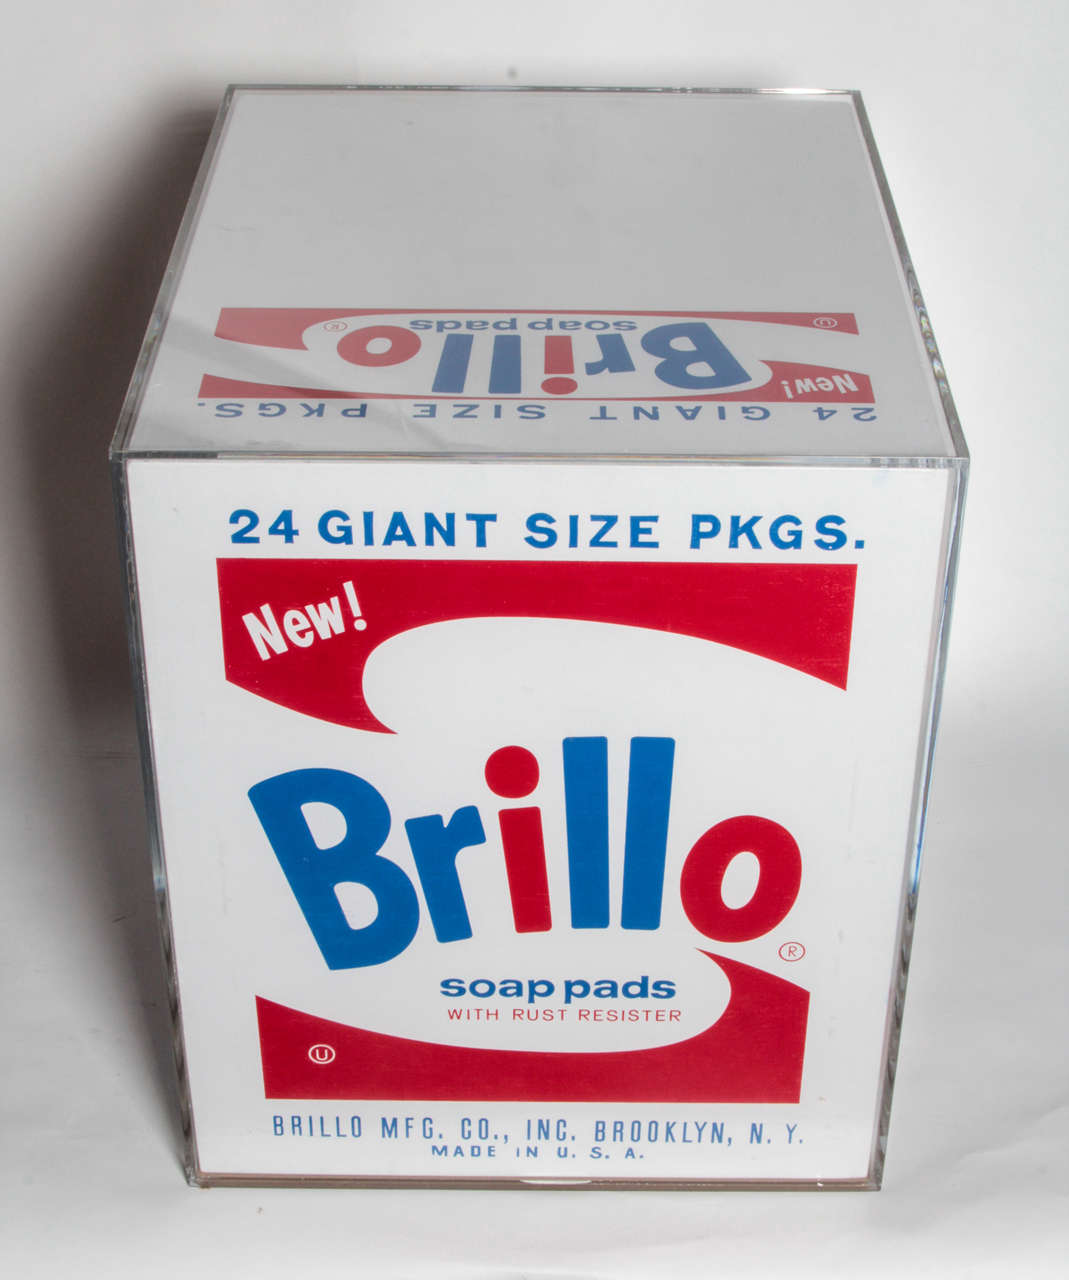 This wonderfully replicated Andy Warhol Brillo Box has been encased in a custom fabricated lucite box. Hewing to the original details of the Warhol Brillo Box, the artist recreated this iconic Pop Art work.